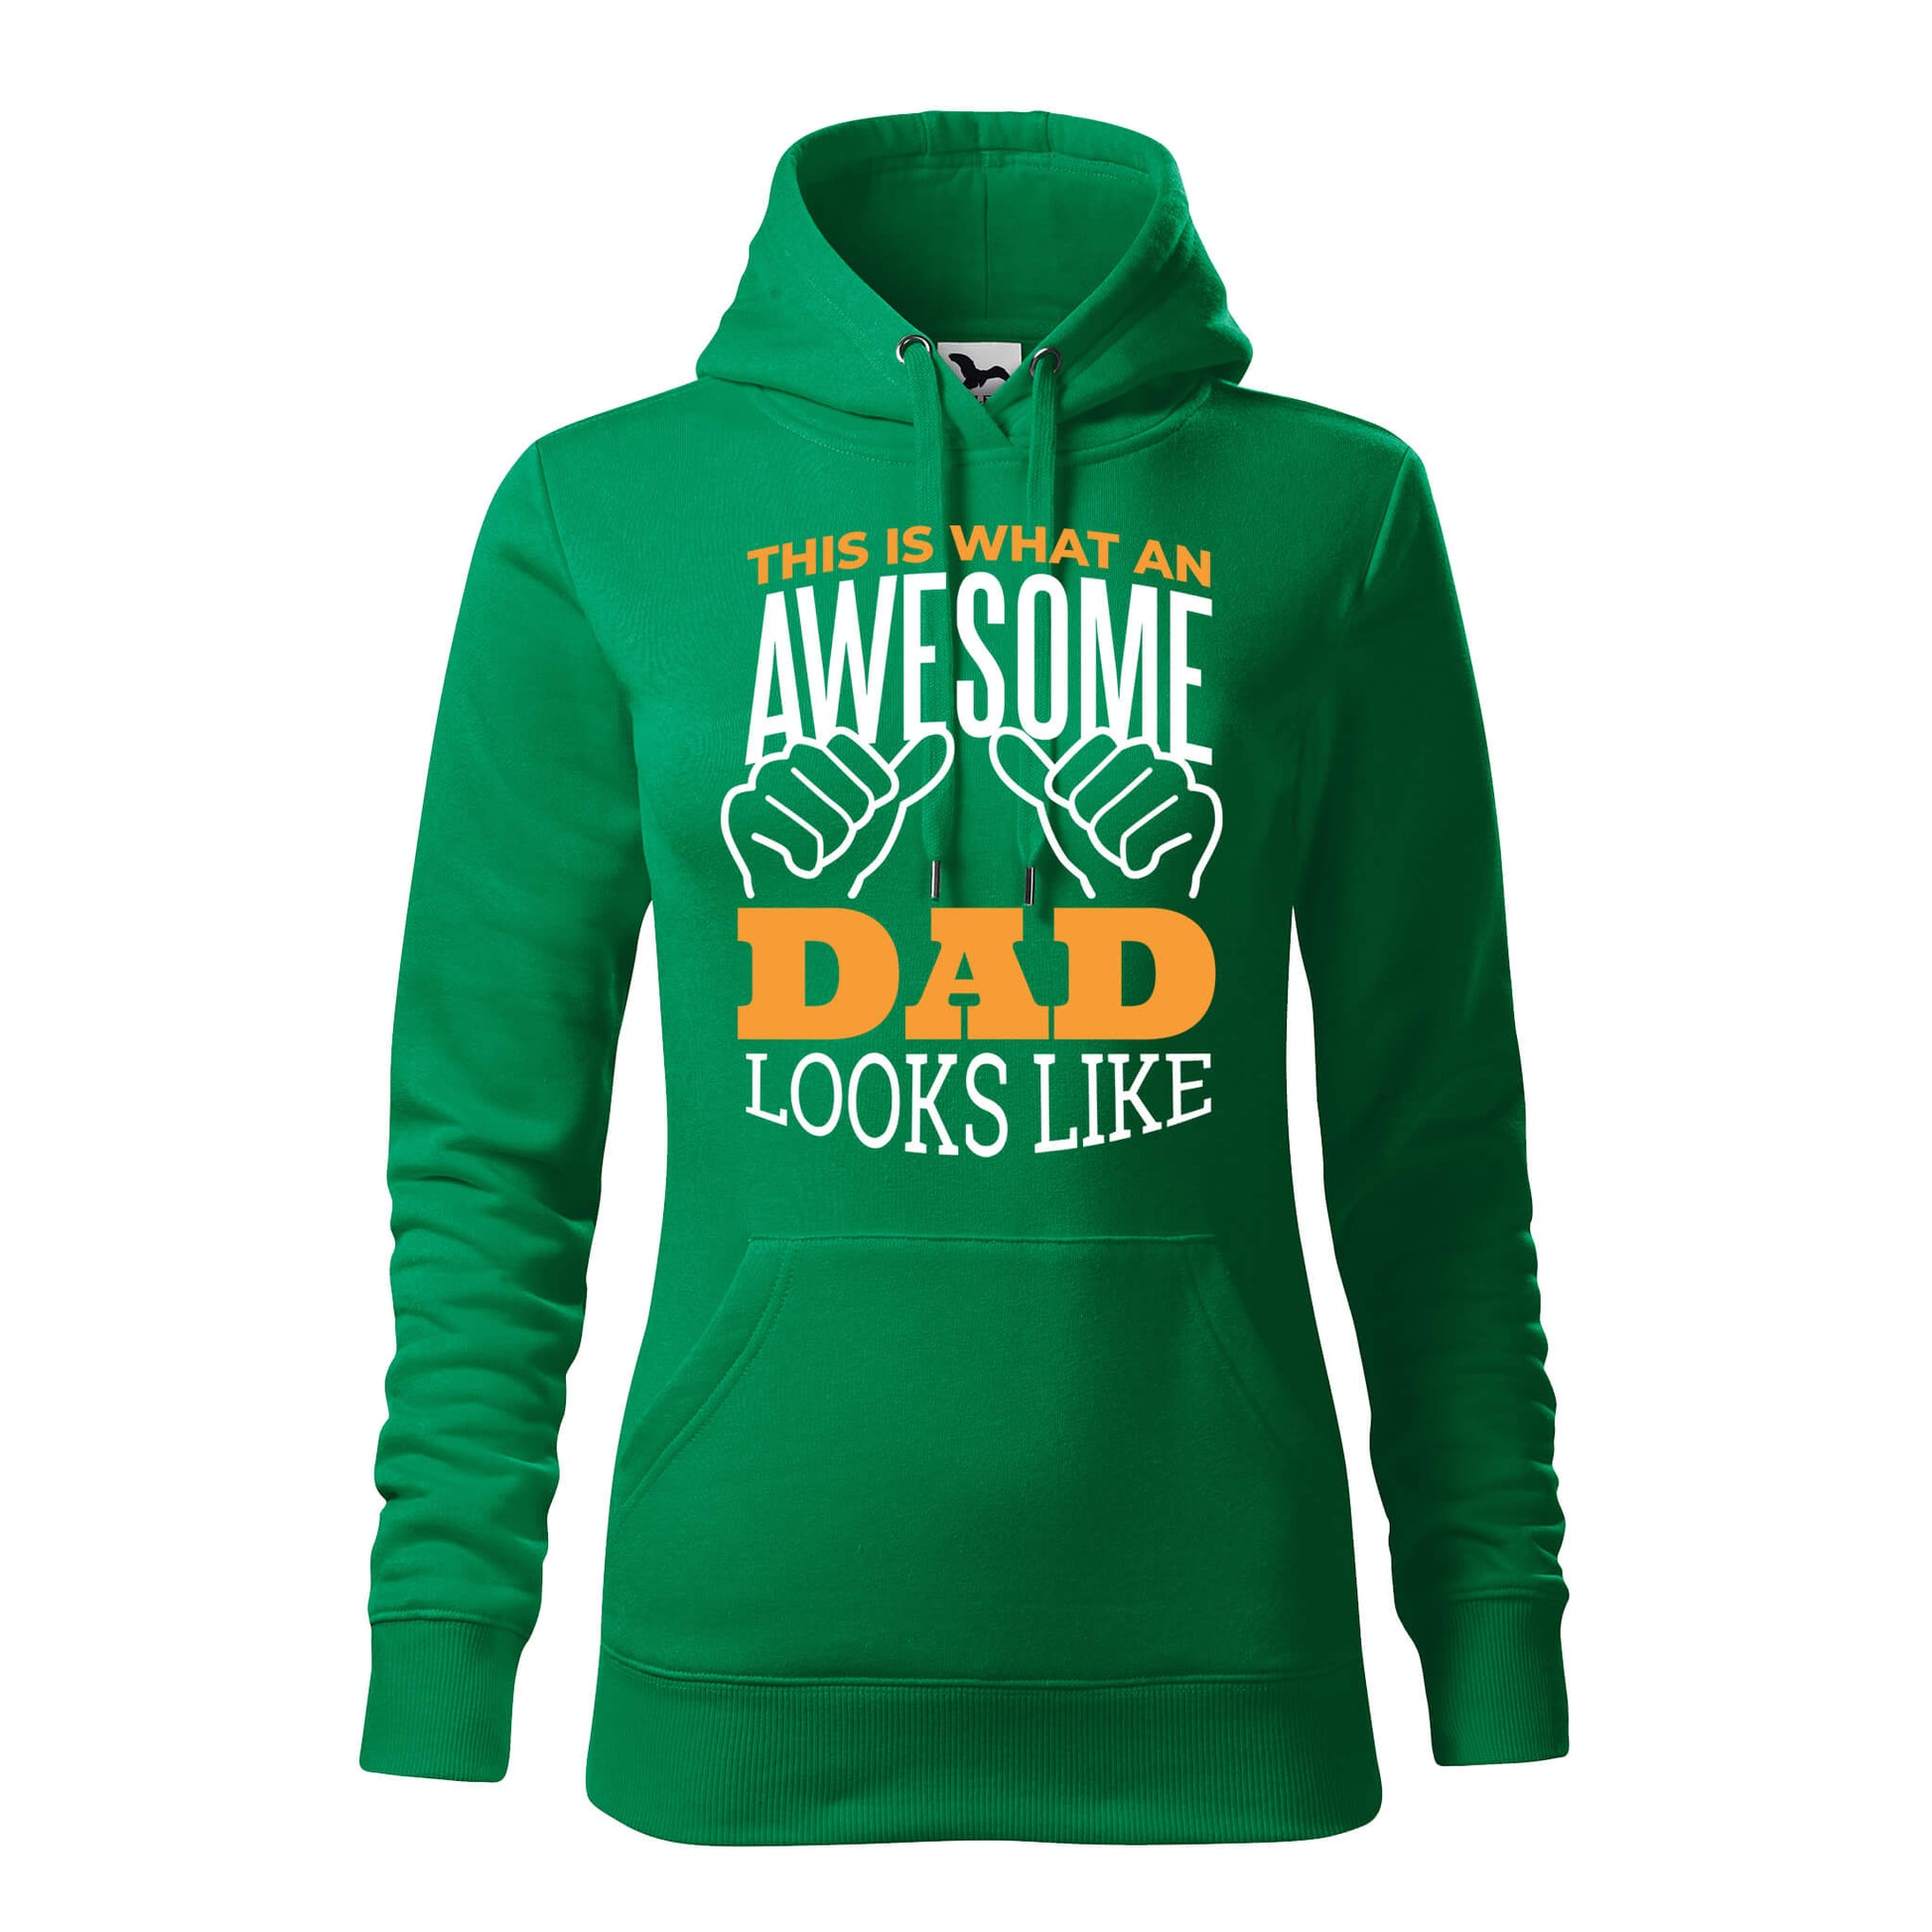 This is what an awesome dad looks like hoodie - rvdesignprint